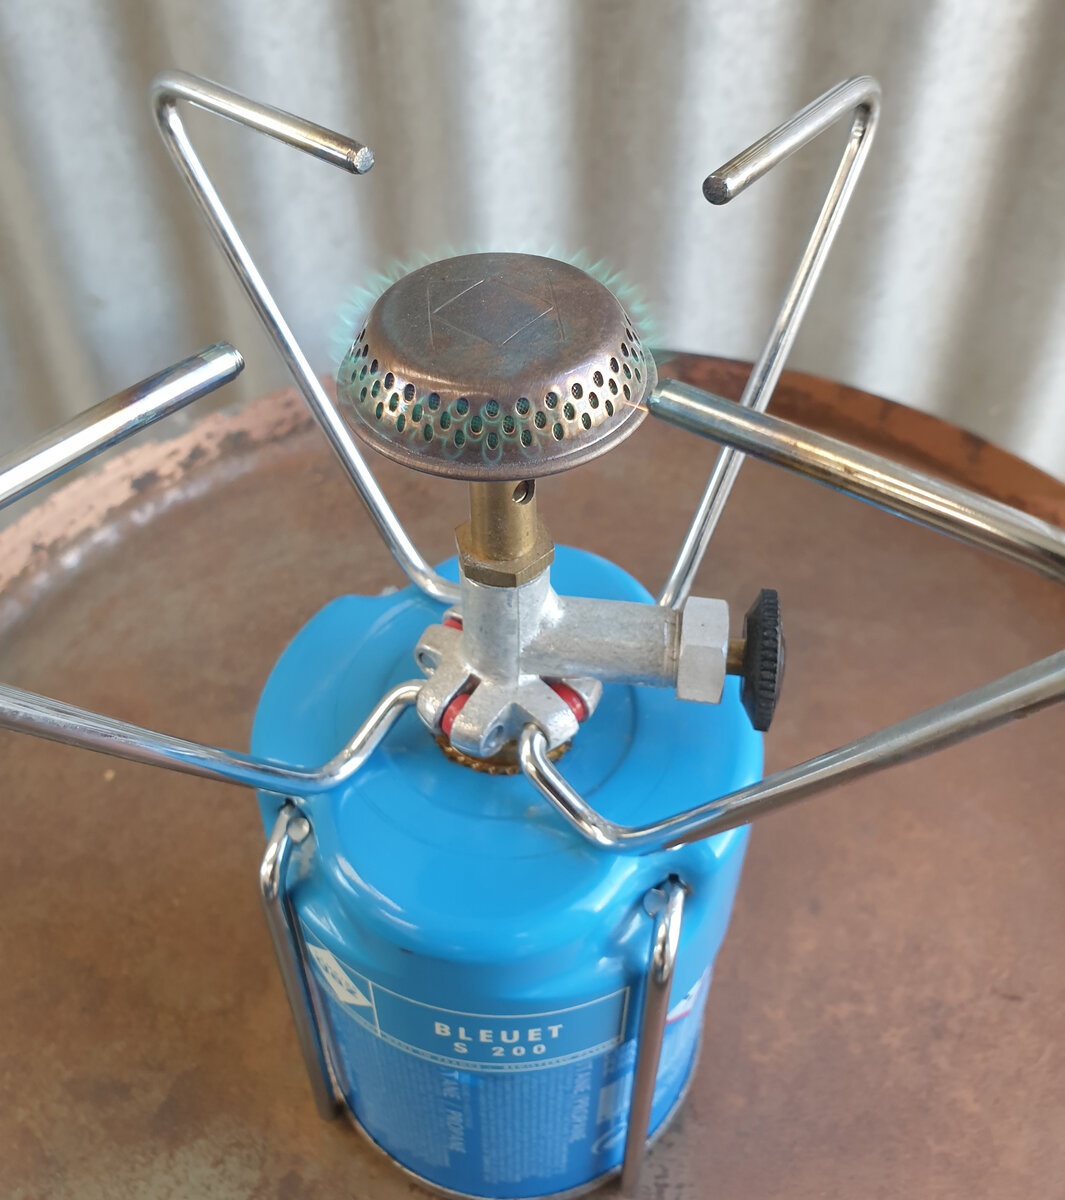 Portable camping gas stove new with box  Camping gaz Bleuet 200 